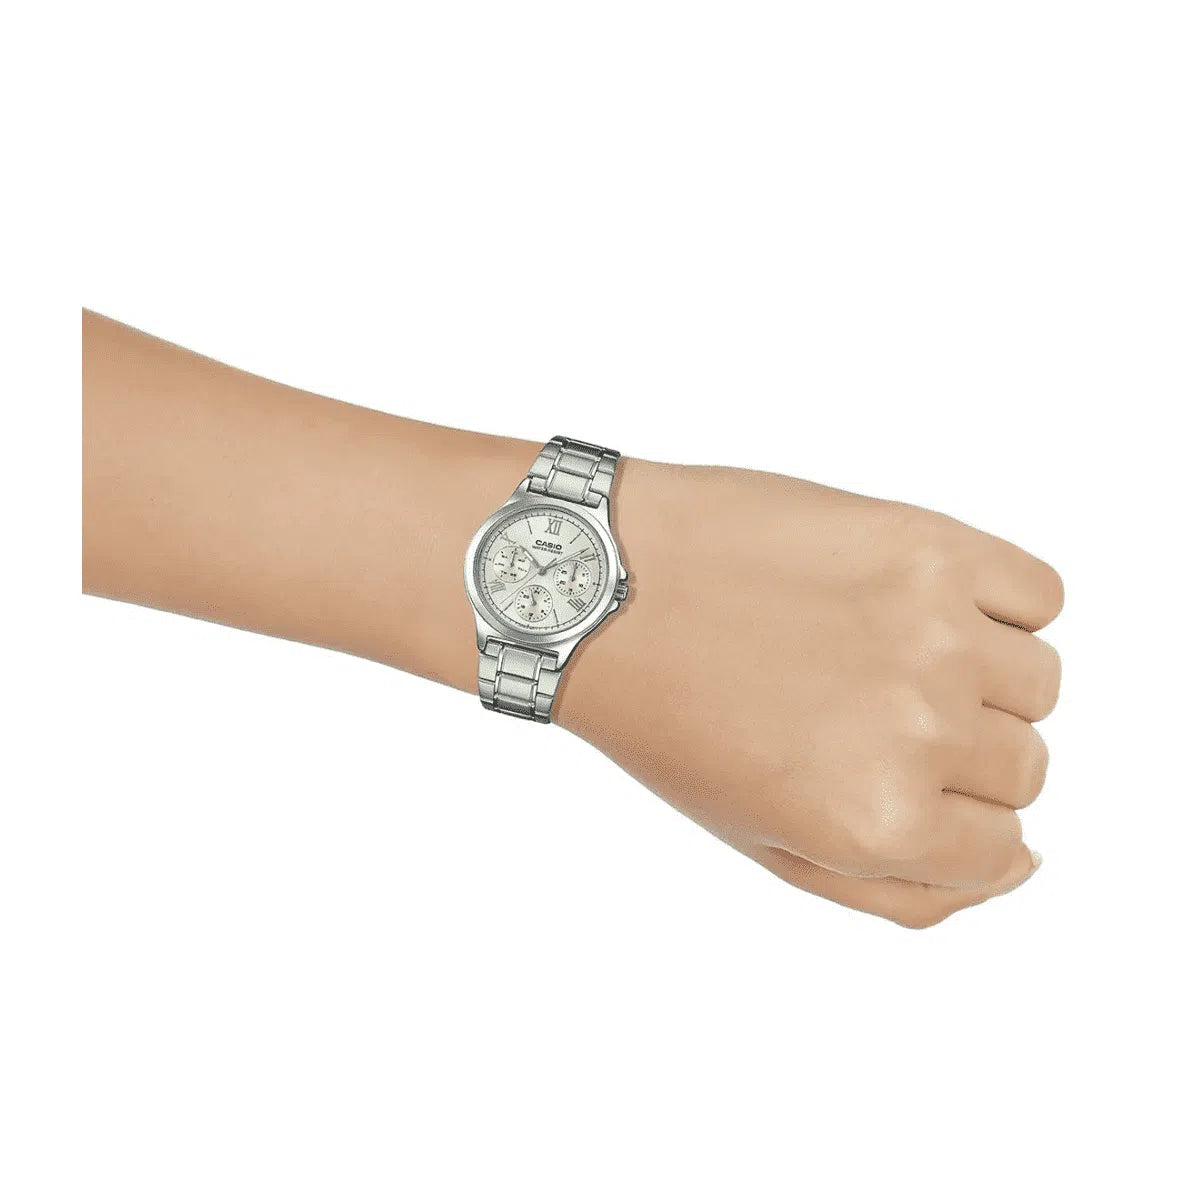 Casio LTP-V300D-9A1 Siver Stainless Watch for Women-Watch Portal Philippines